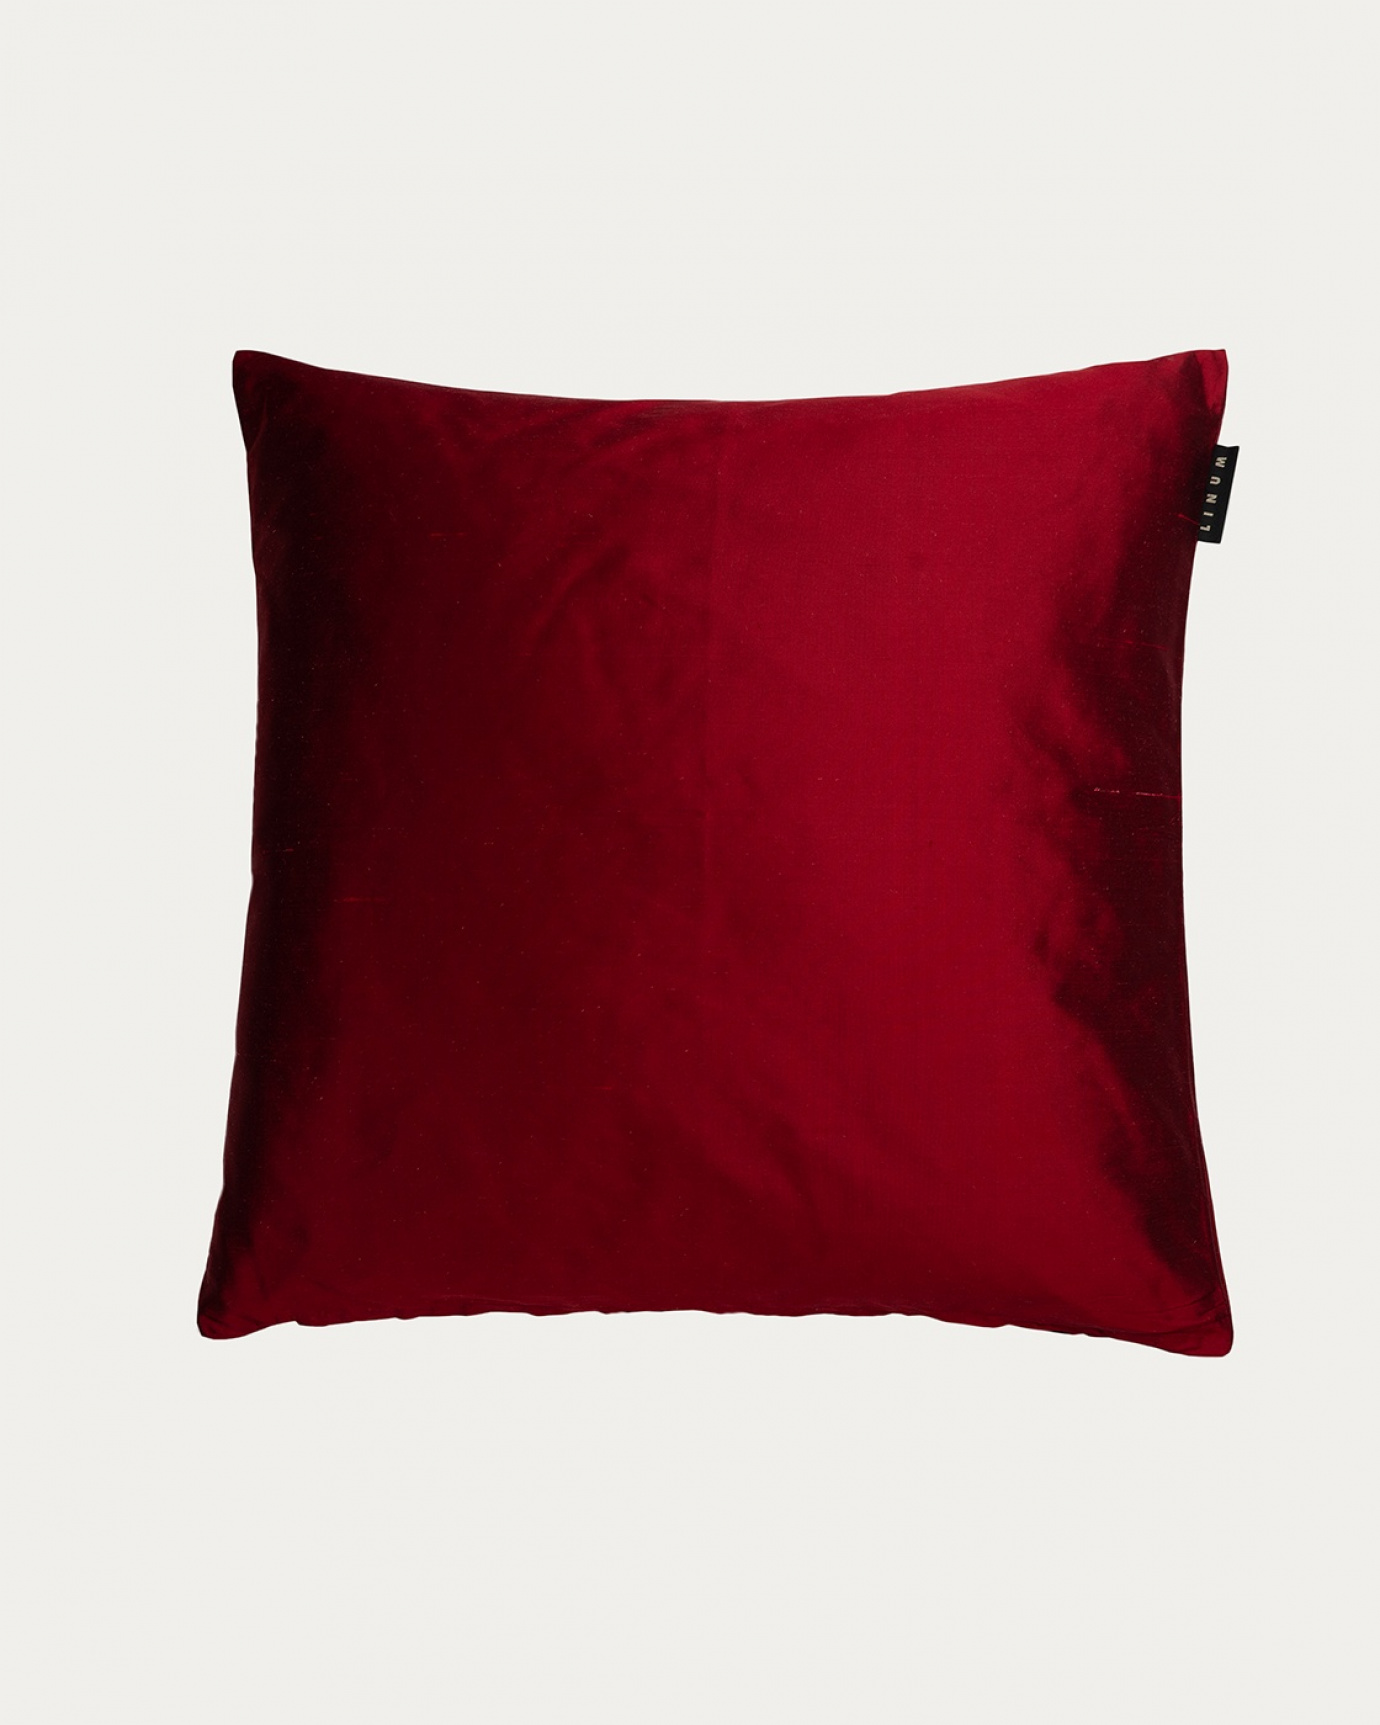 Product image pale wine red SILK cushion cover made of 100% dupion silk that gives a nice lustre from LINUM DESIGN. Size 50x50 cm.